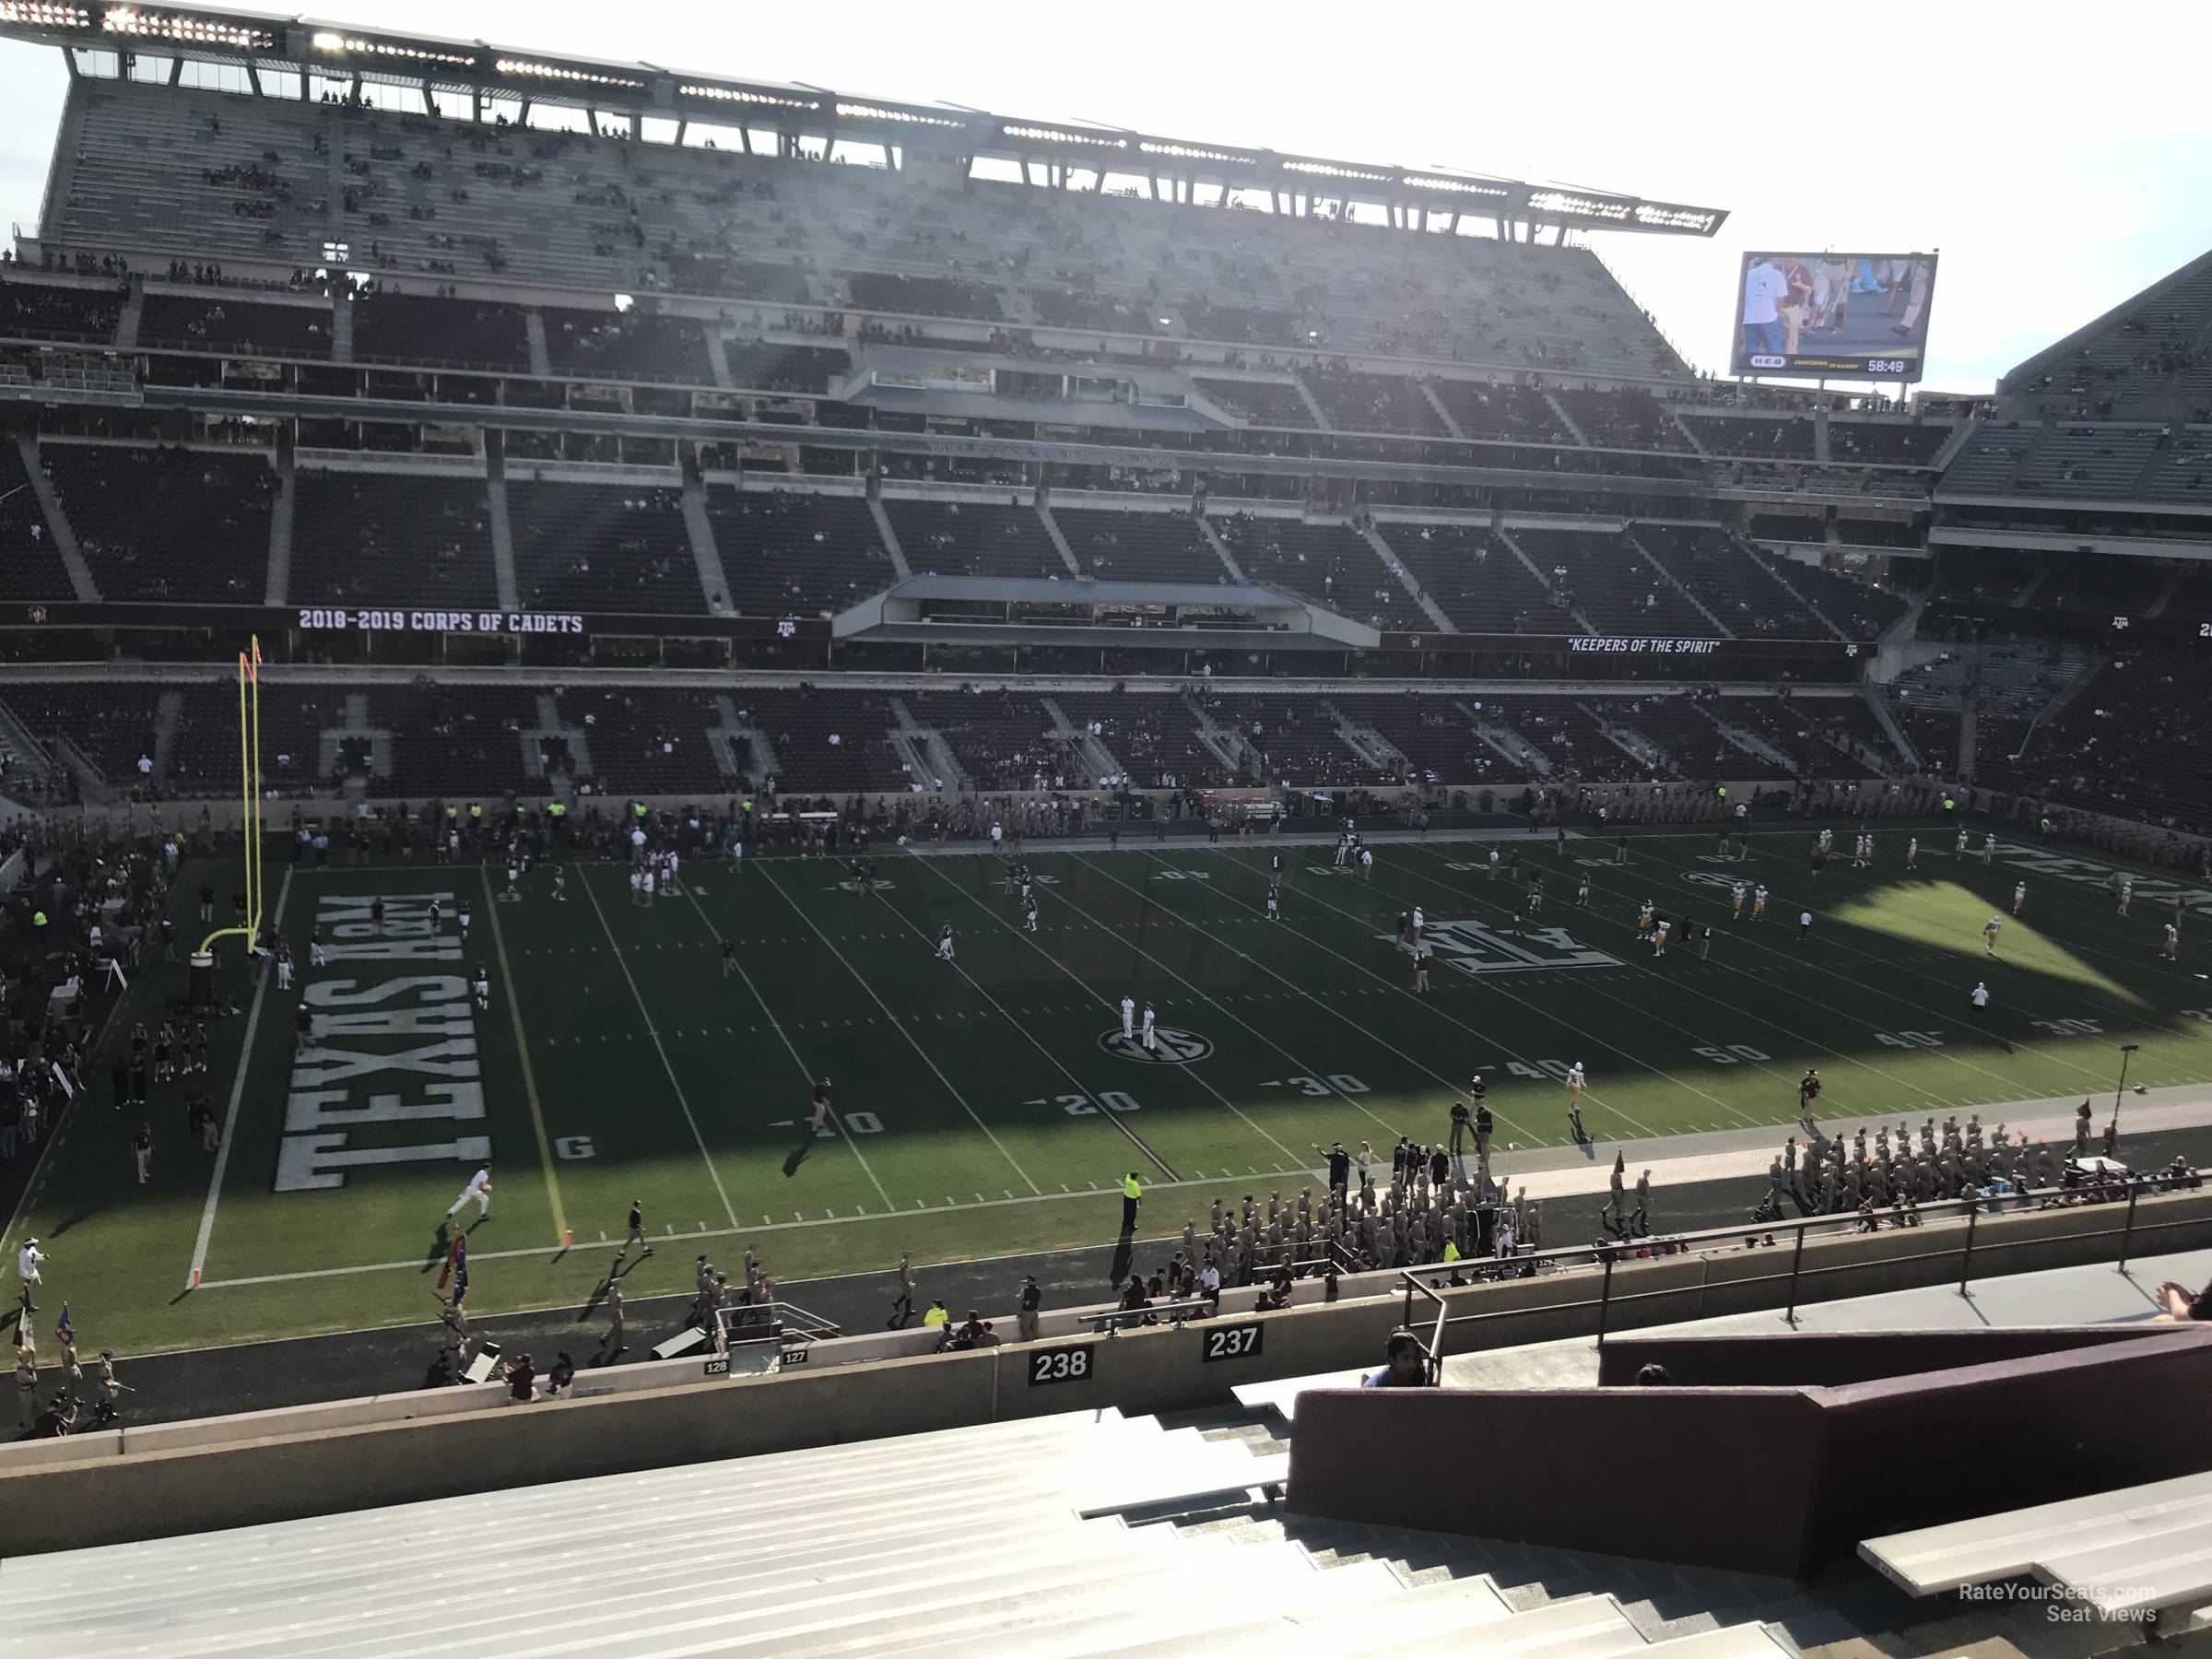 section 238, row 20 seat view  - kyle field